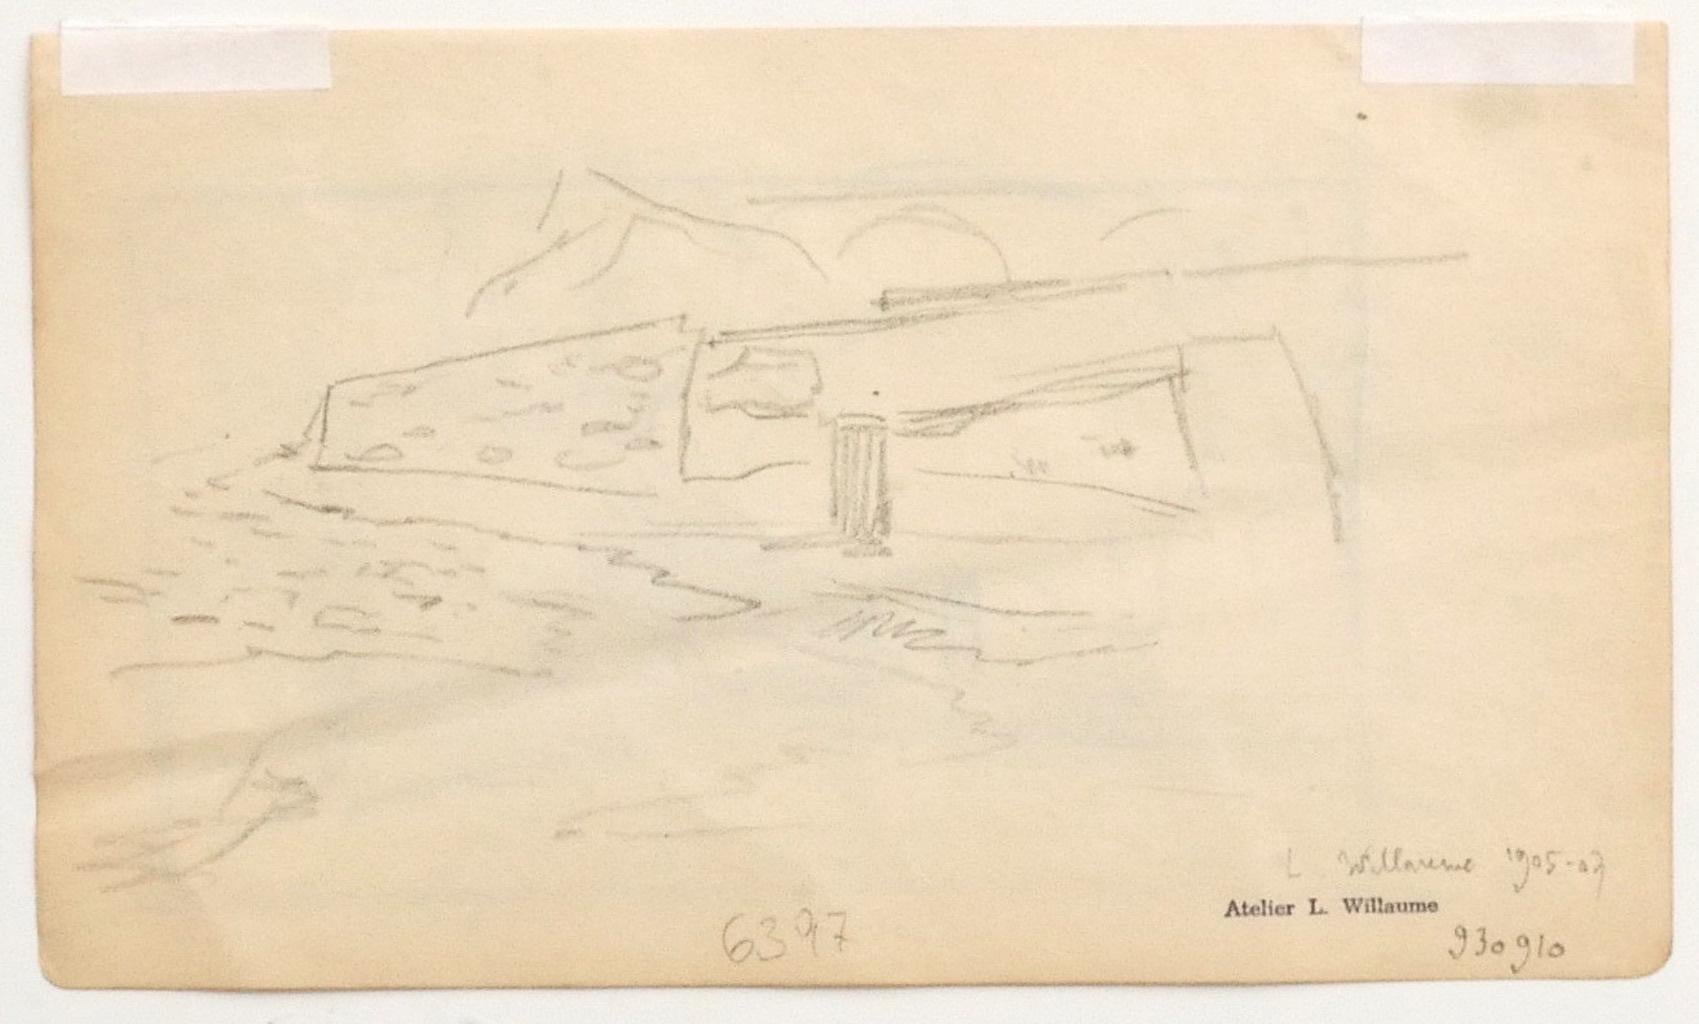 Landscape - Original Pencil on Paper by Louis-Charles Willaume - 1905